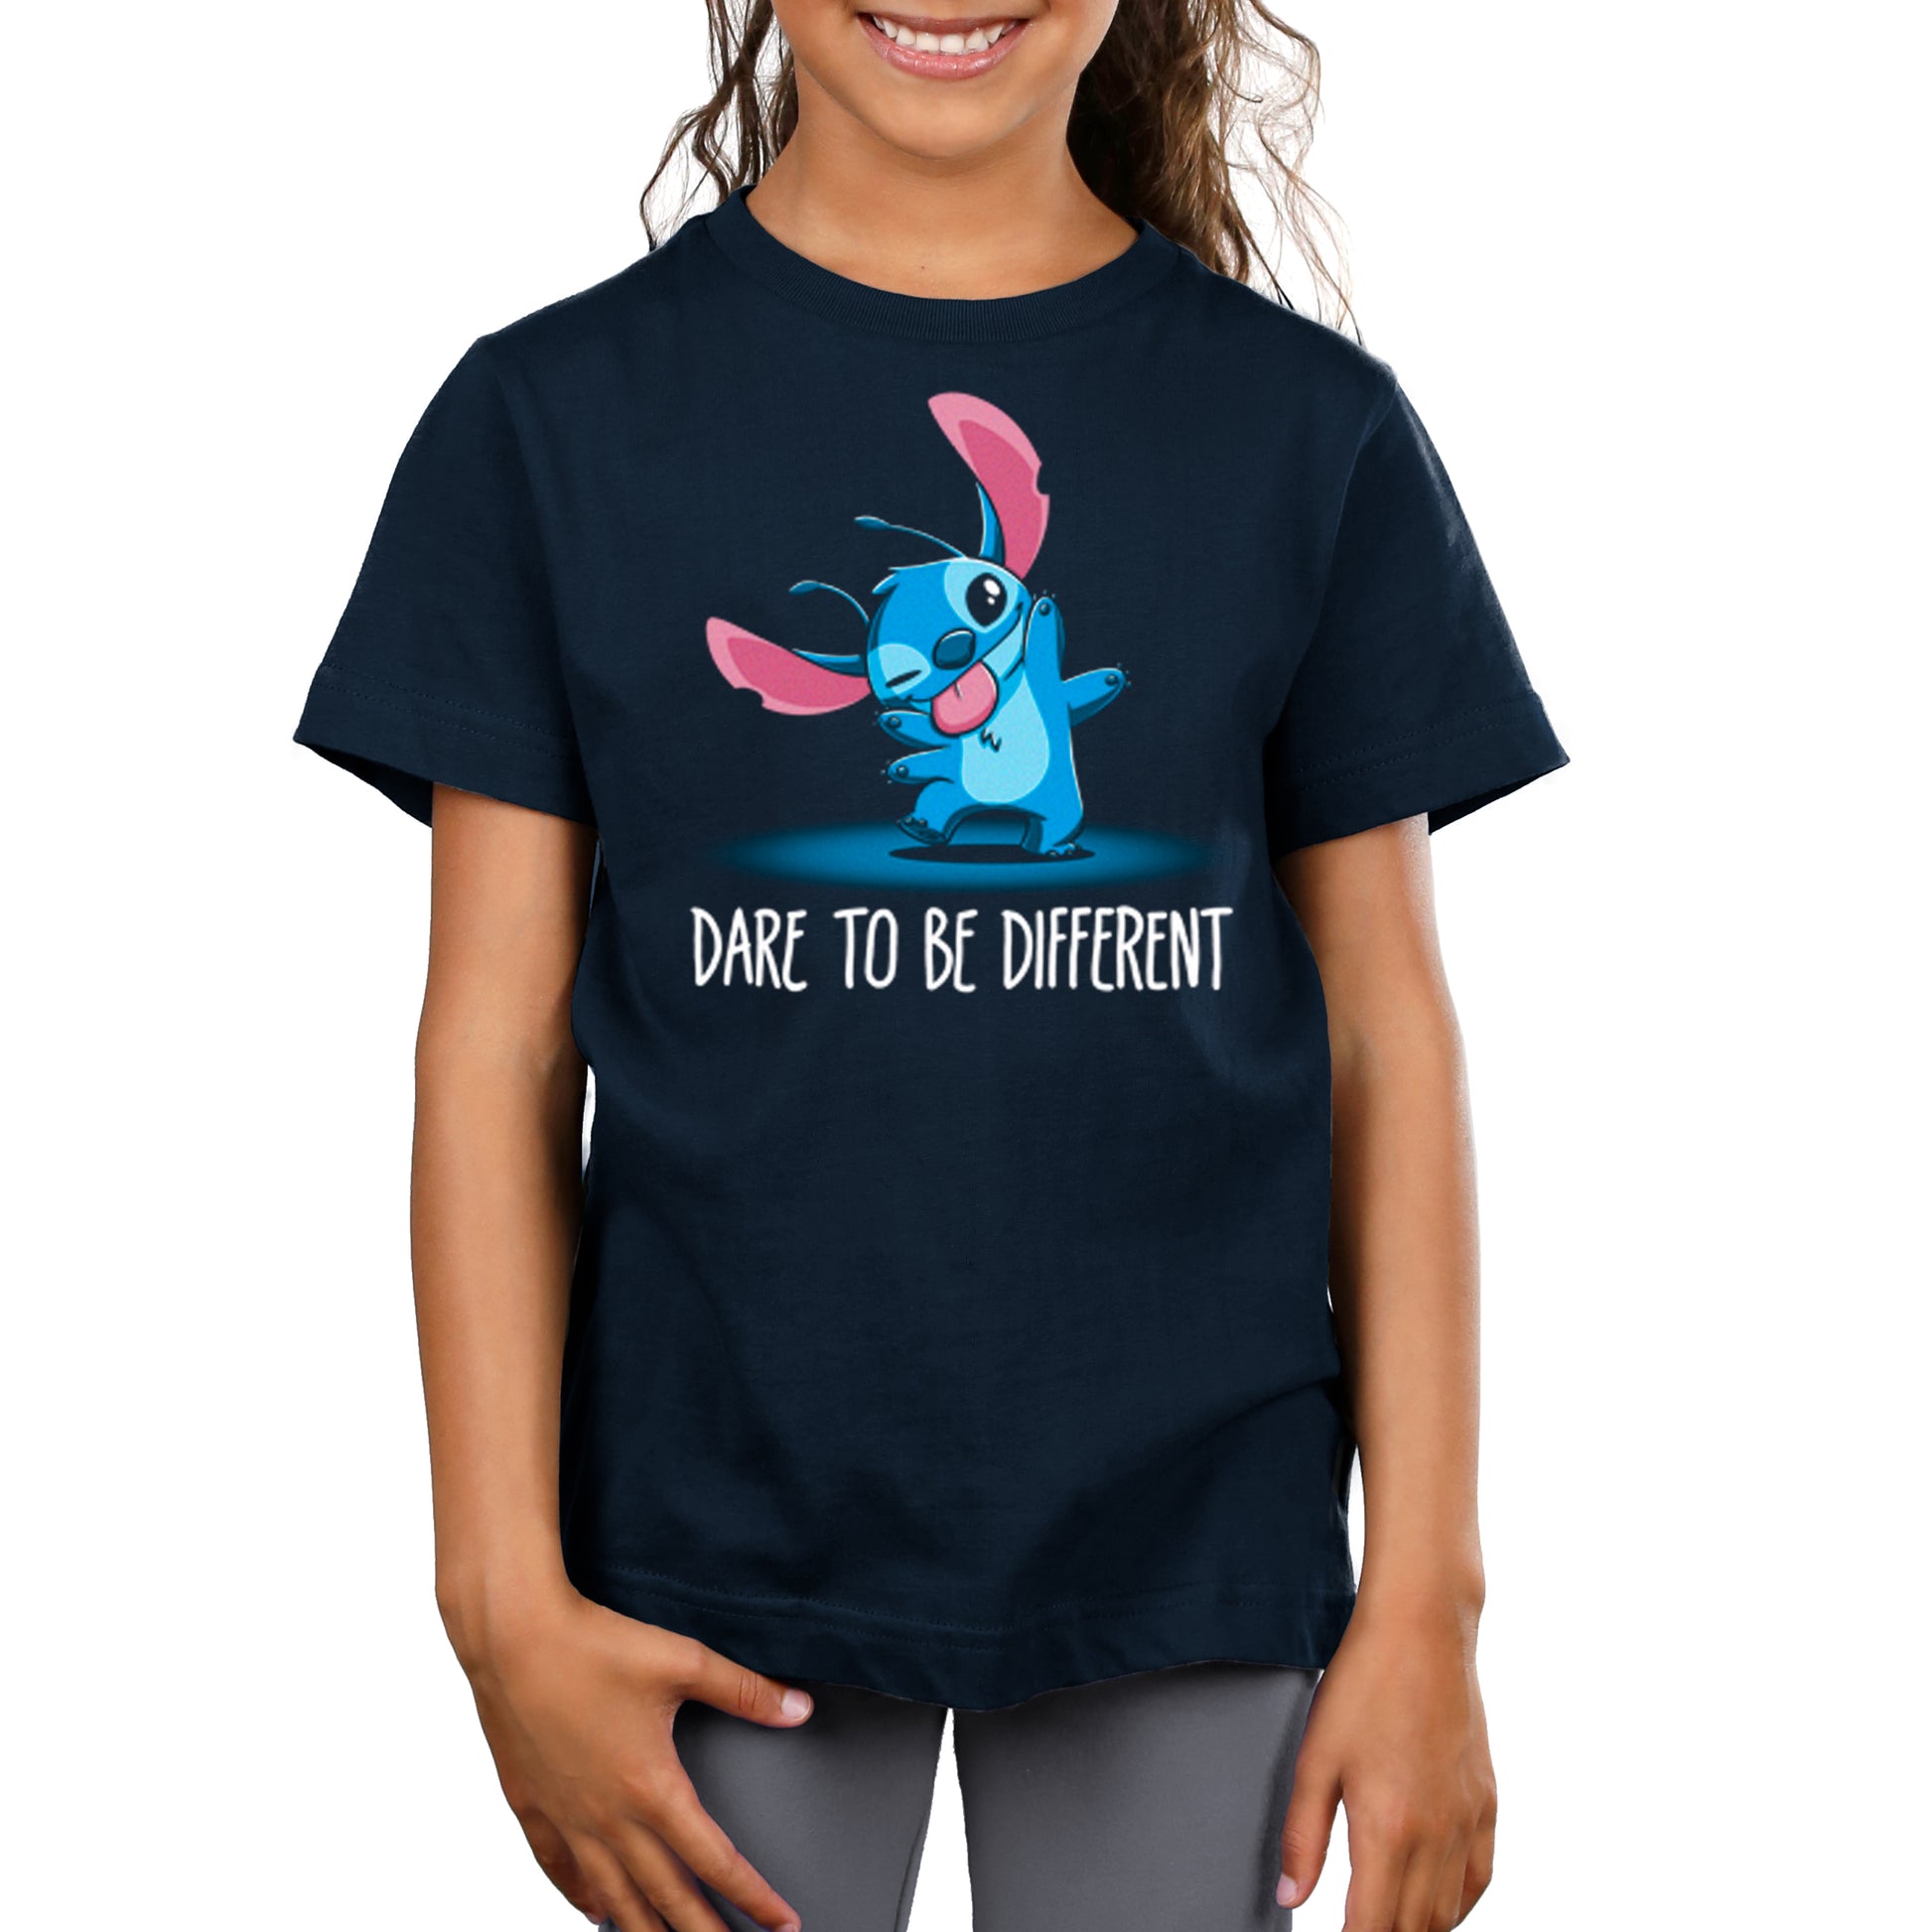 A girl wearing a t-shirt that says "Dare To Be Different" by Disney.